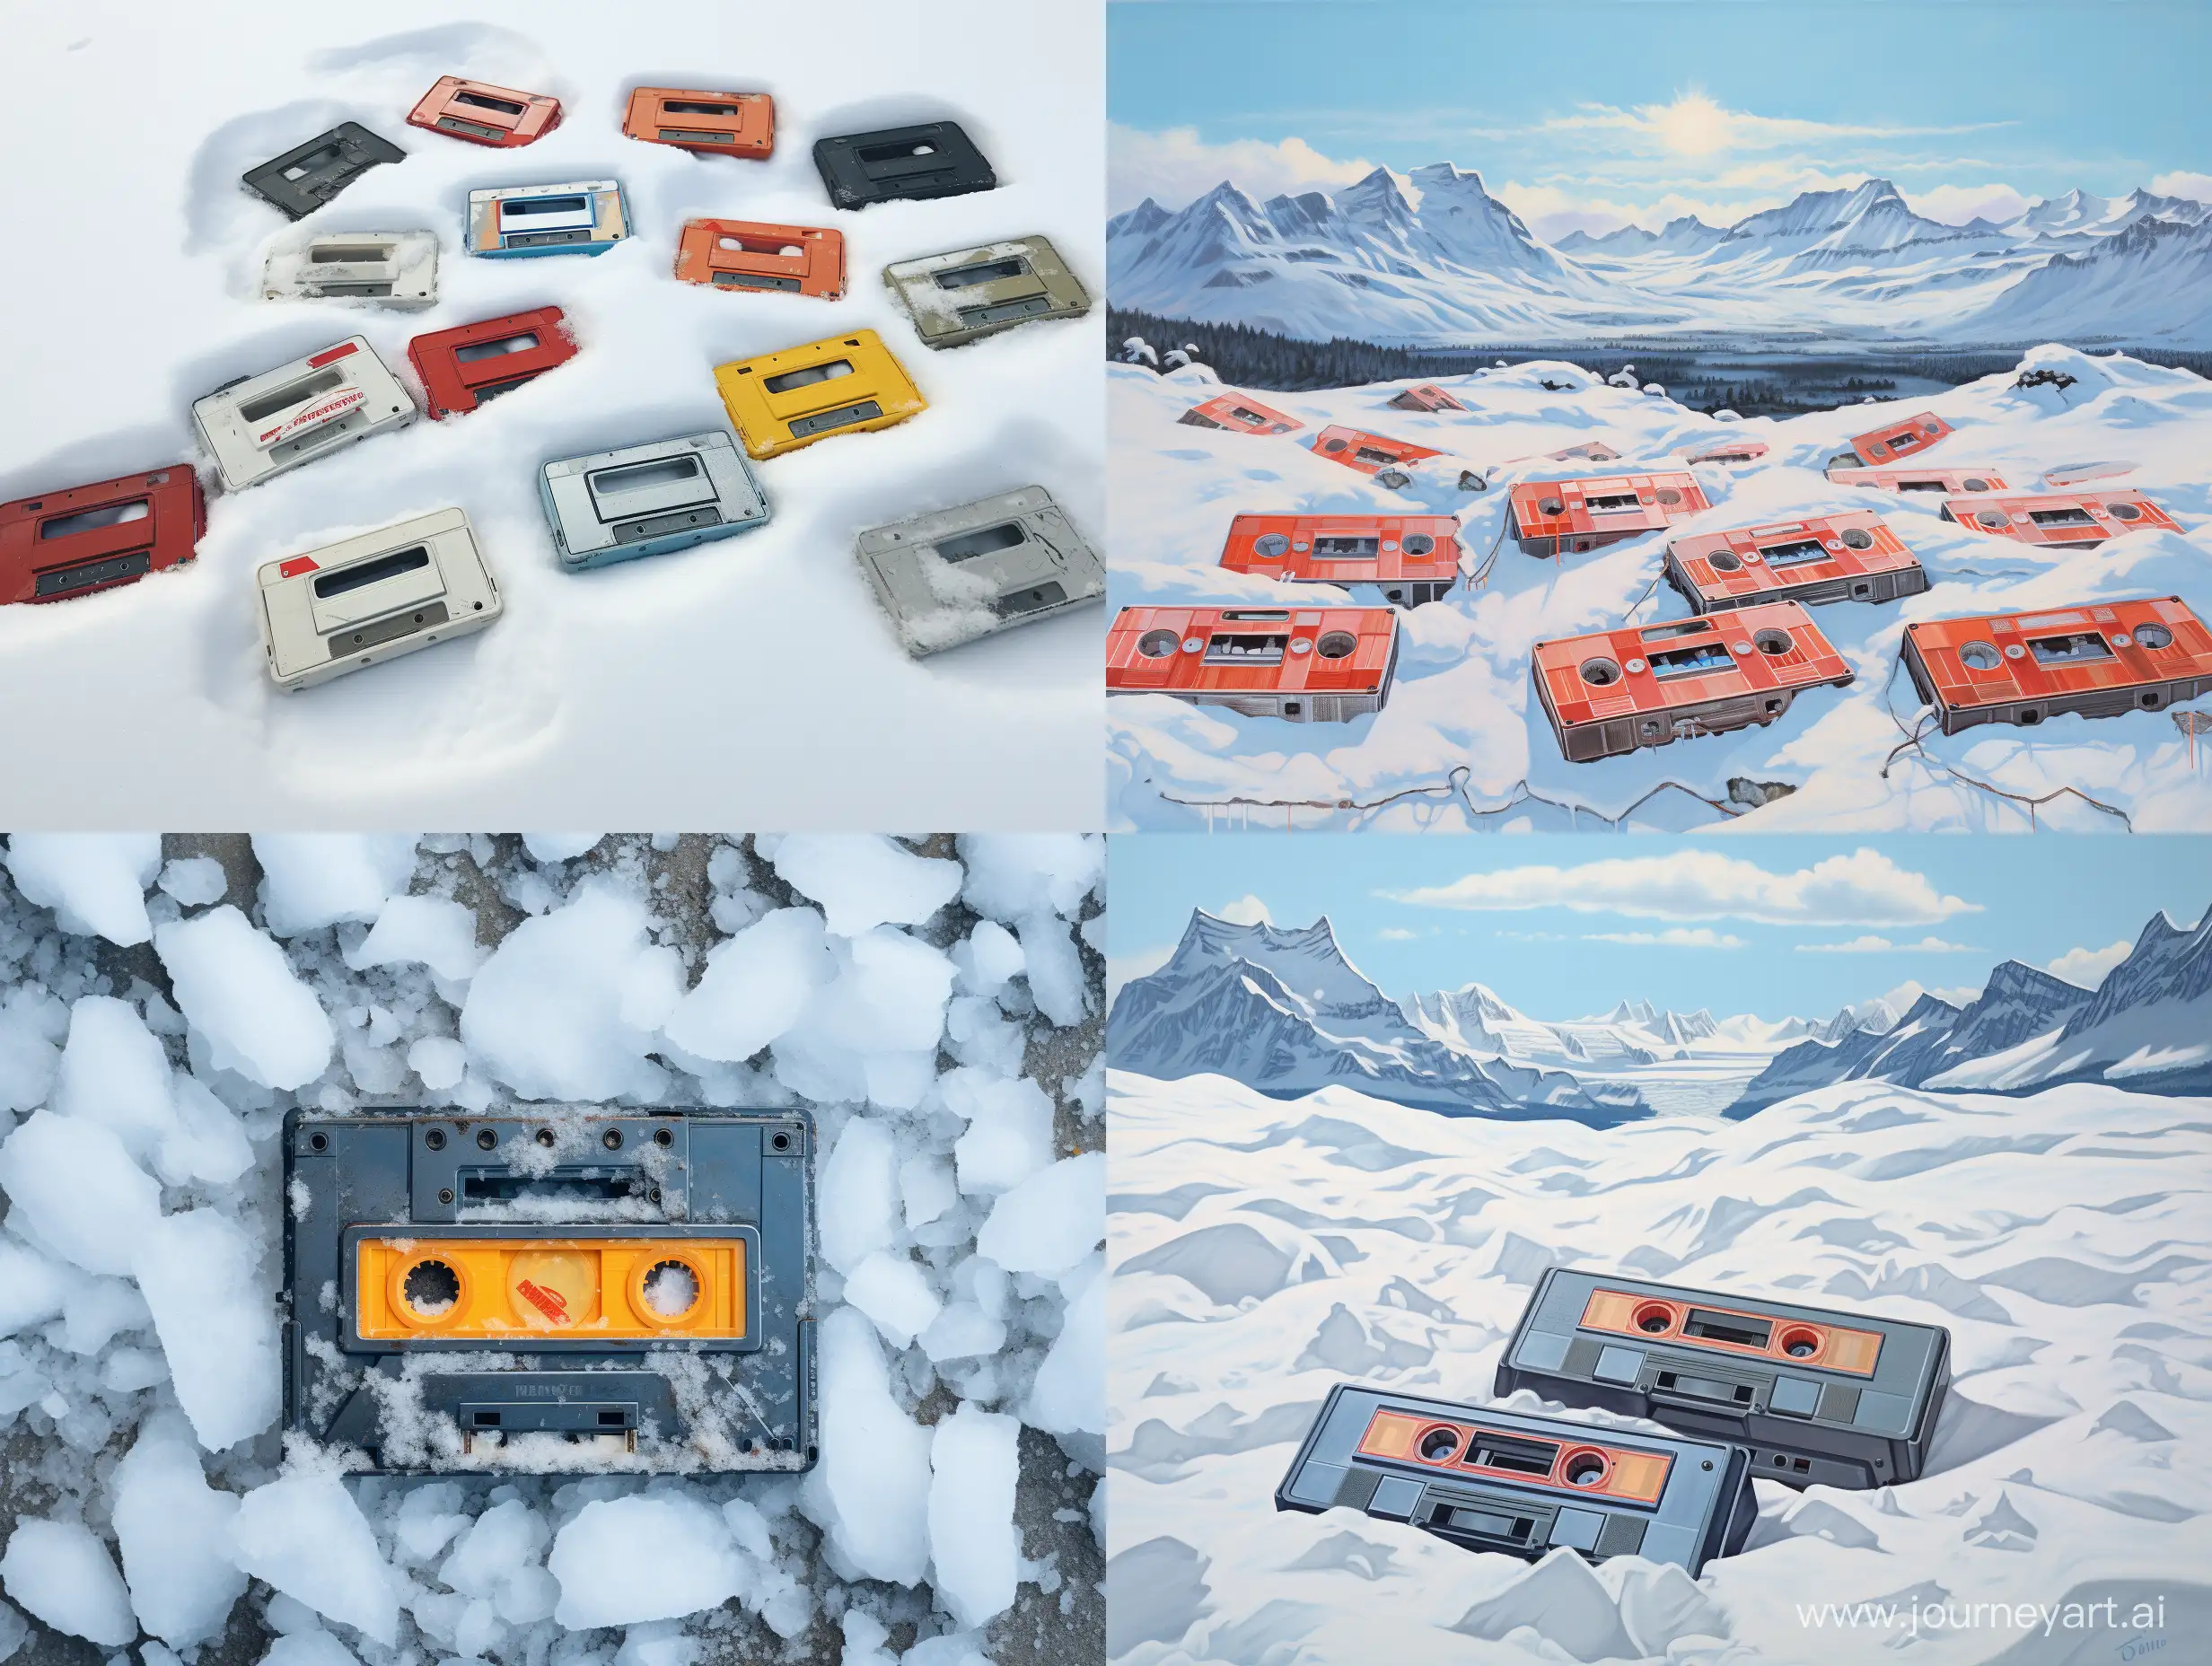 The cassettes are covered with snow a lot